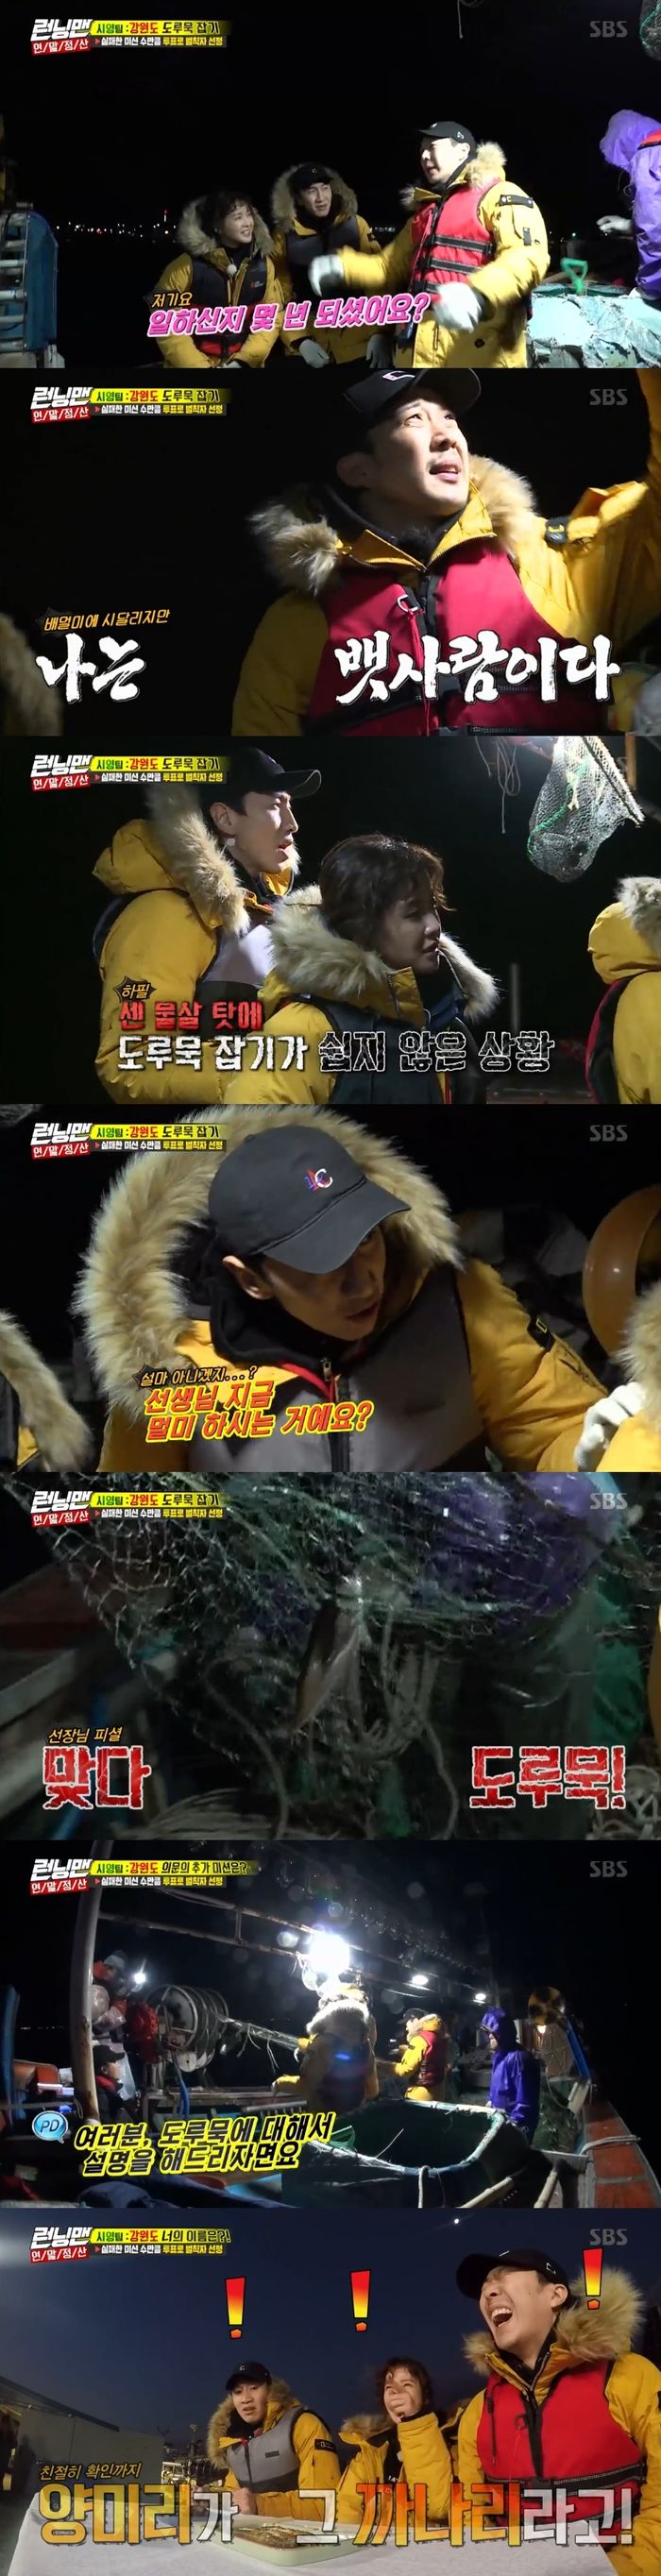 Haha and Lee Kwang-soo opened the boatman situation drama.On SBS Running Man broadcast on the 23rd, Chai Rong team was shown leaving The Net fishing from dawn to catch Artoscopus japonicus.Earlier, the Chai Rong team had to carry out a mission to catch the Arctoscopus japonicus after dinner.Haha started the seamans contest on the ship on the spot.Haha said, I have been fishing for four generations. All of your Arctoscopus japonicus comes from our ship.Lee Kwang-soo pointed out, Ive never seen a sailor put a nausea under his ear. Haha joked, This is the point.But a while later Haha complained of seasickness: Lee Kwang-soo asked Haha, Are you sick now? and Haha said, I have a headache.It was hard to catch Arctoscopus japonicus because of the strong waves, but Arctoscopus japonicus was caught at the end of The Net.At that time, the crew informed the Chai Rong team about common sense related to the Arctoscopus japonicus.The Chai Rong team, which brought all The Net up, returned to land; the crew then proceeded with further commissions.It was to match what fish it was, with fish similar to Arctoscopus japonicus side by side.The Chai Rong team succeeded in missioning with the help of the captain who was standing next to him, shouting the correct answer, Yang Mi-ri.